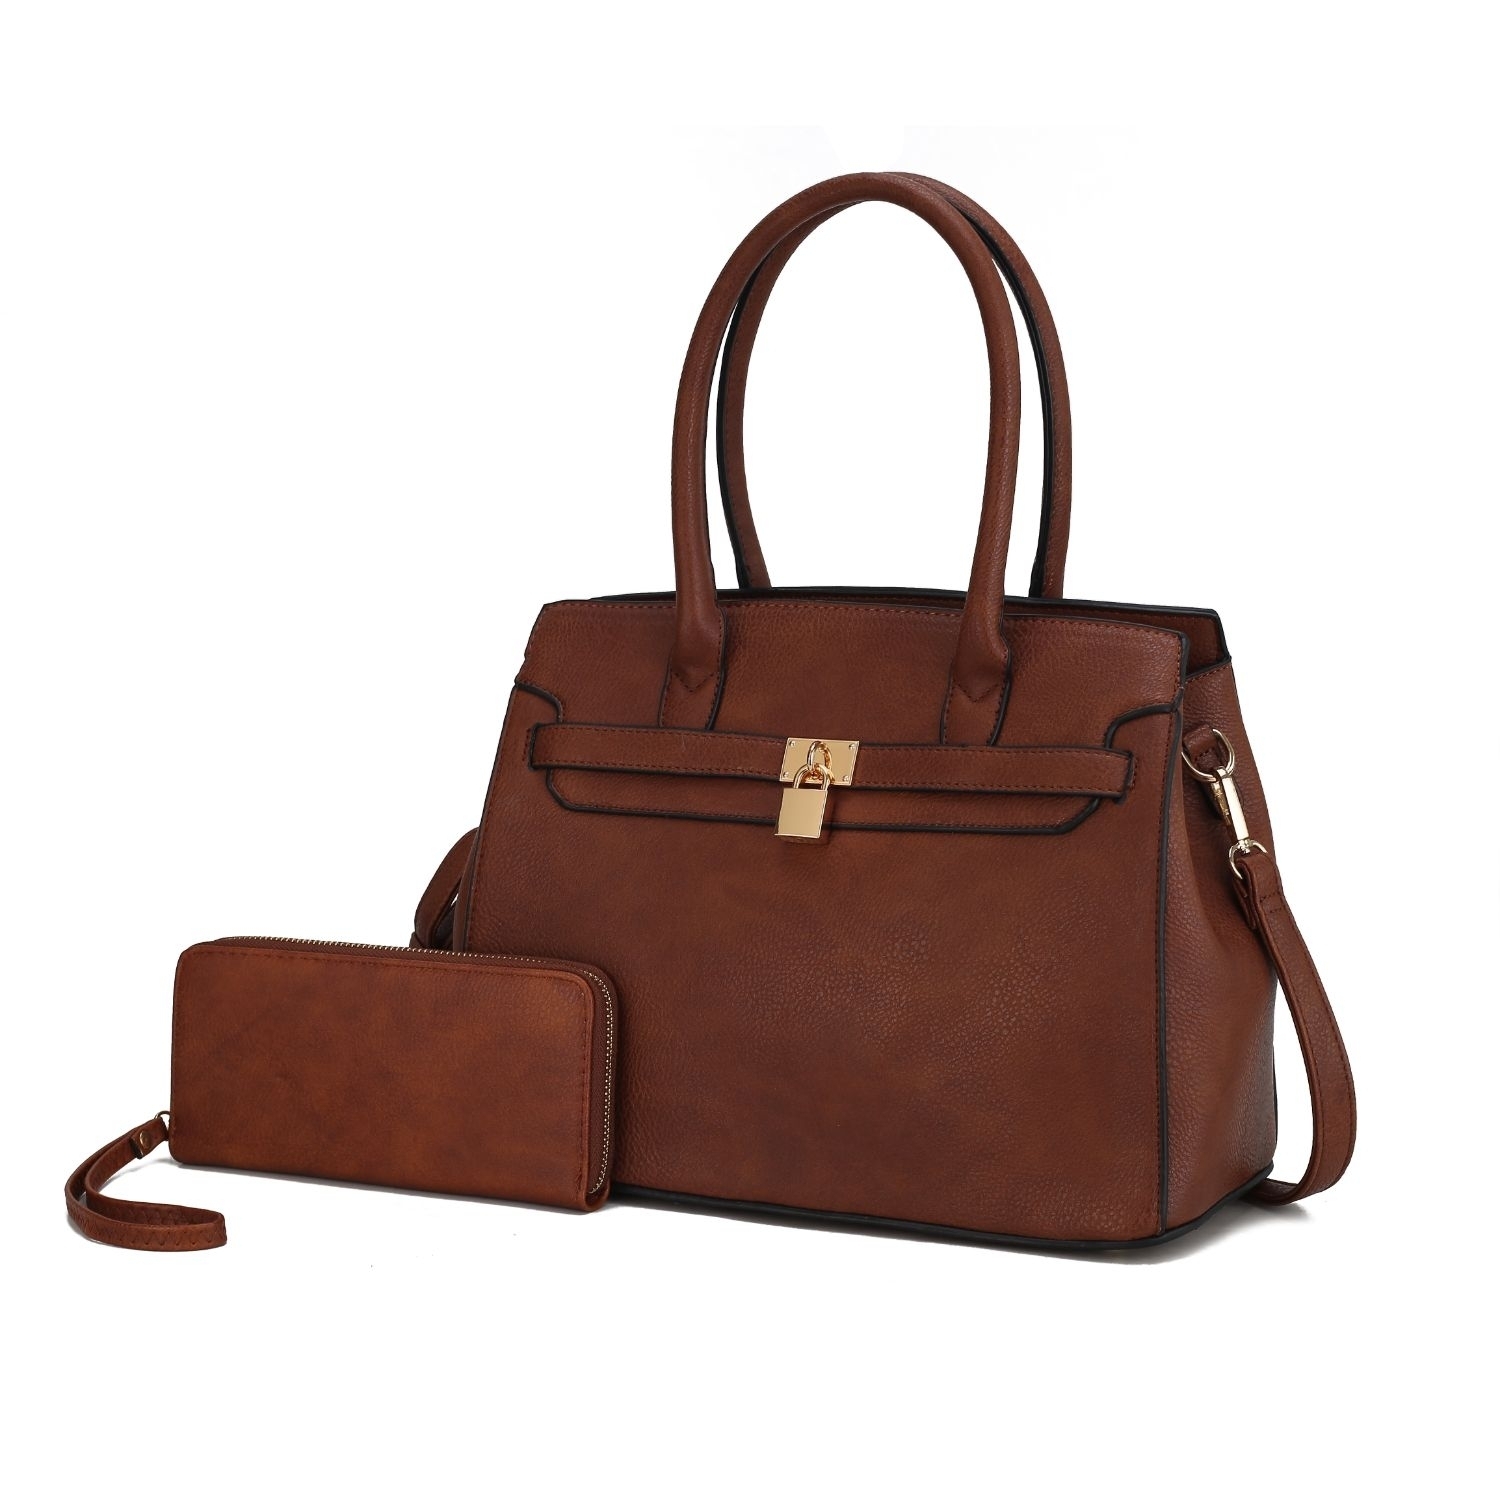 MKF Collection Bruna Satchel Handbag With A Matching Wallet By Mia K -2 Pieces Set - Brown